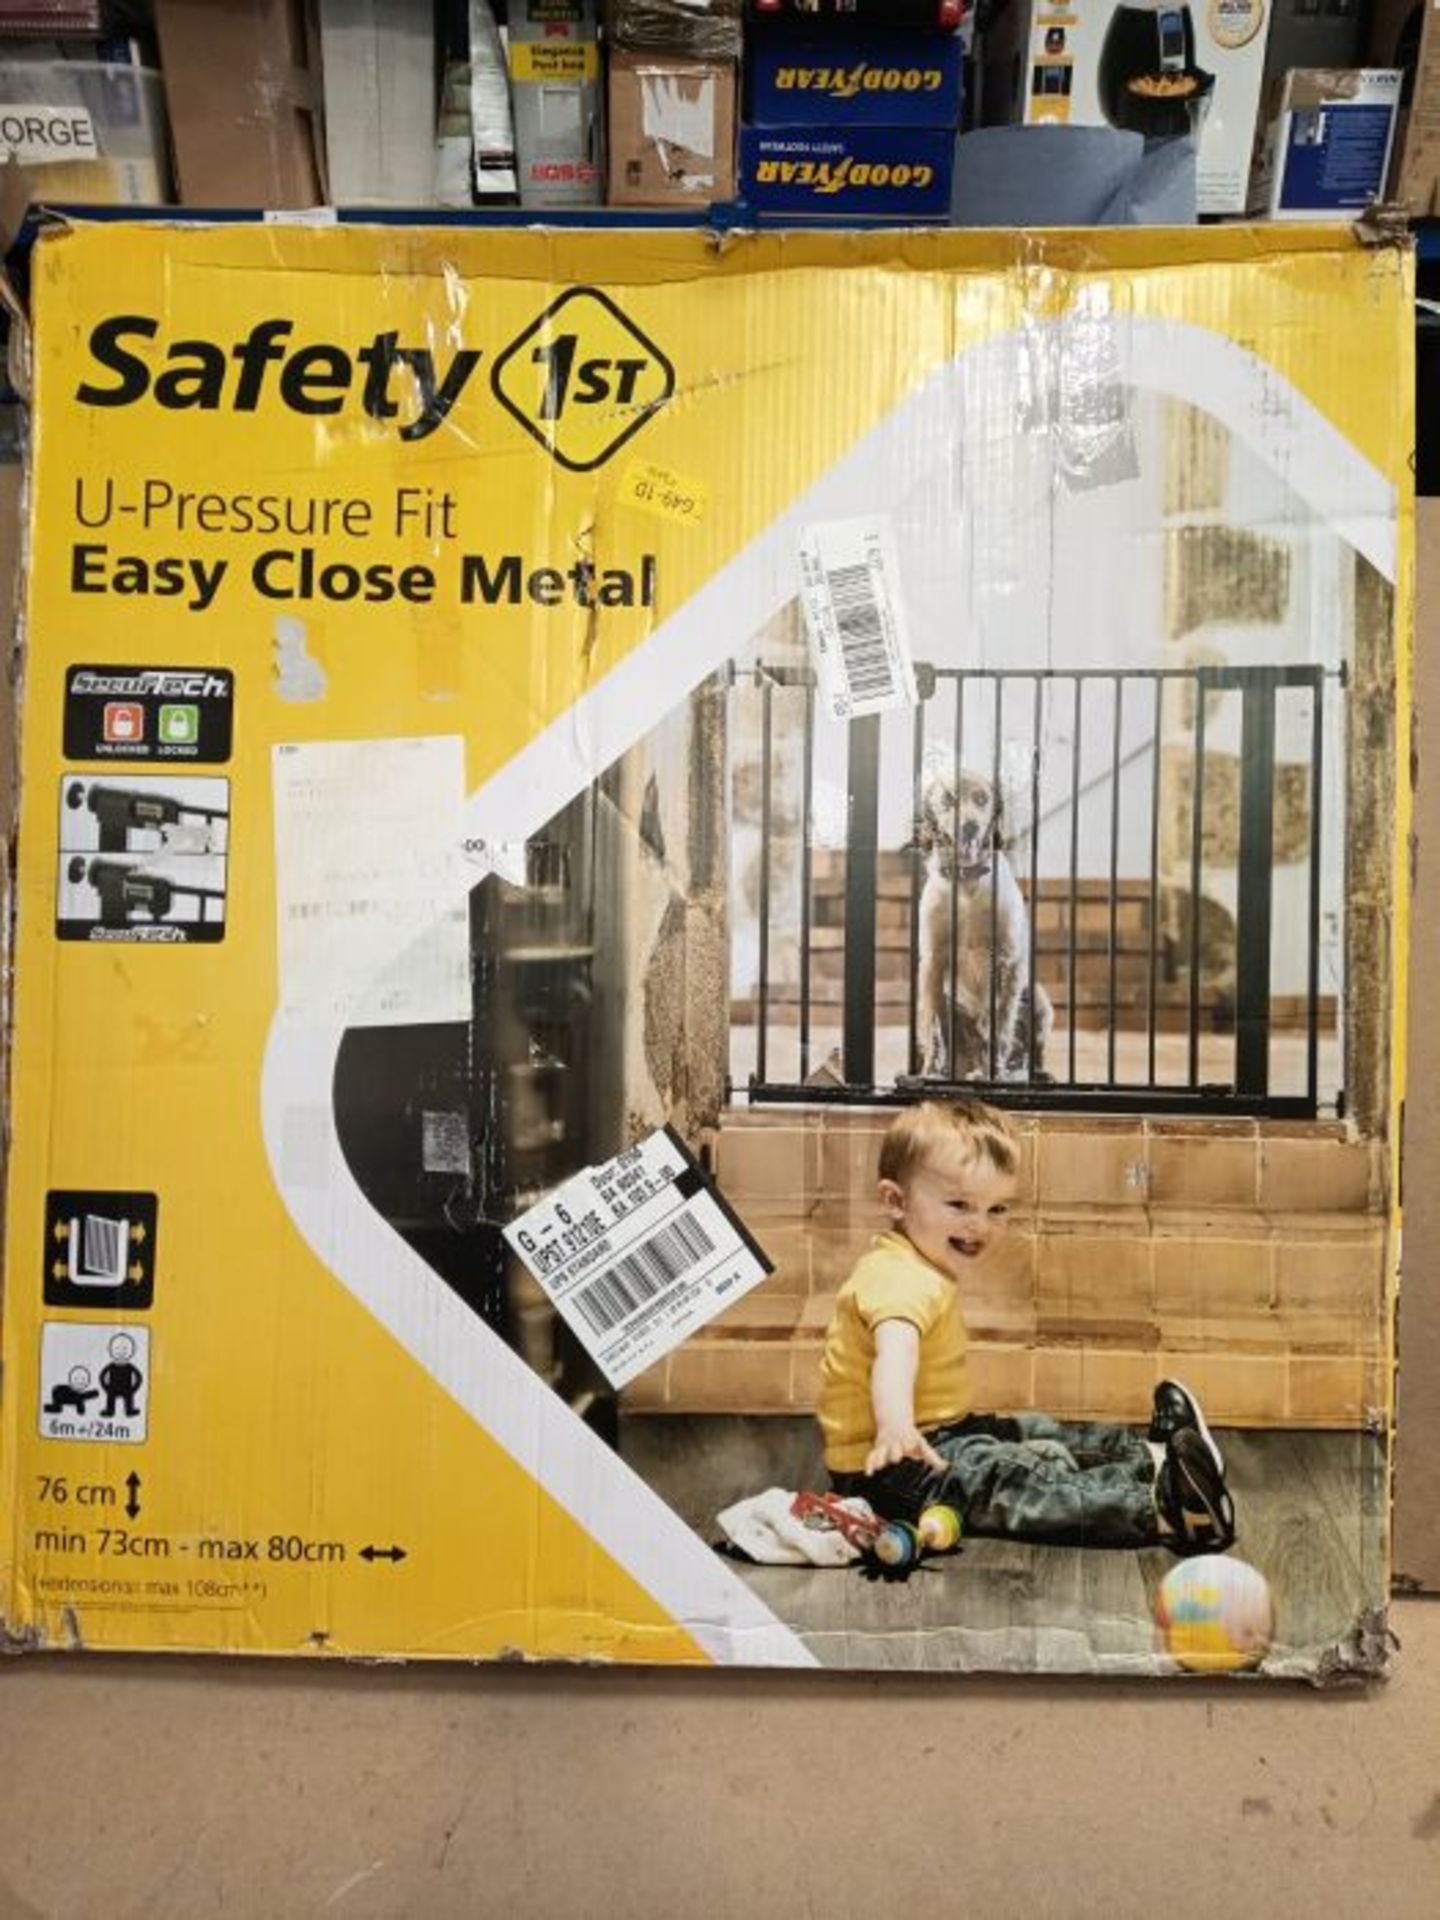 Safety 1st SecurTech® Simply Close Metal Gate - Image 2 of 3